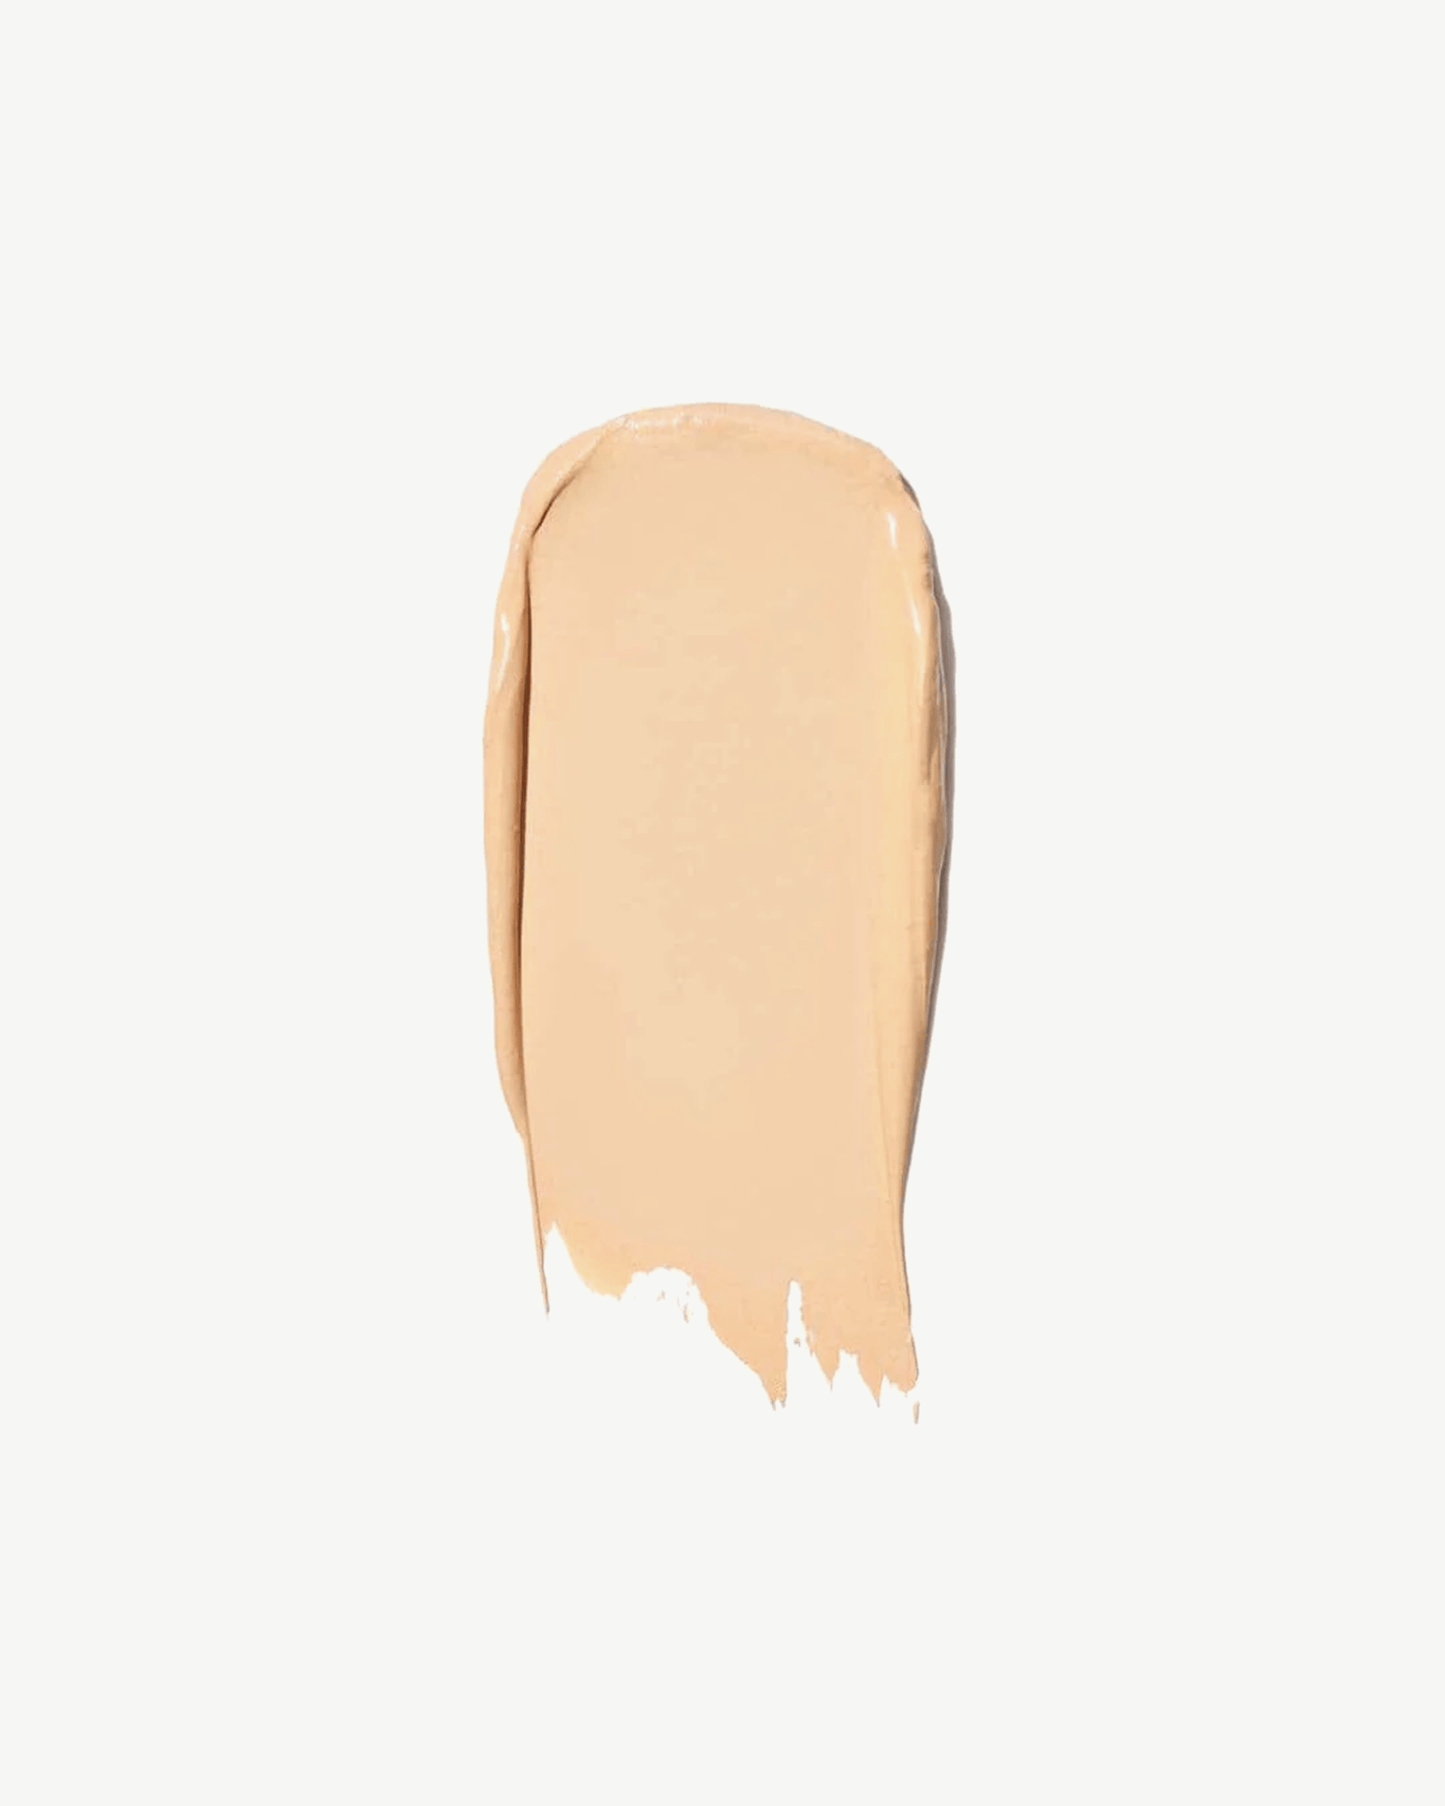 Shade 11 (for light skin with subtle yellow undertones)